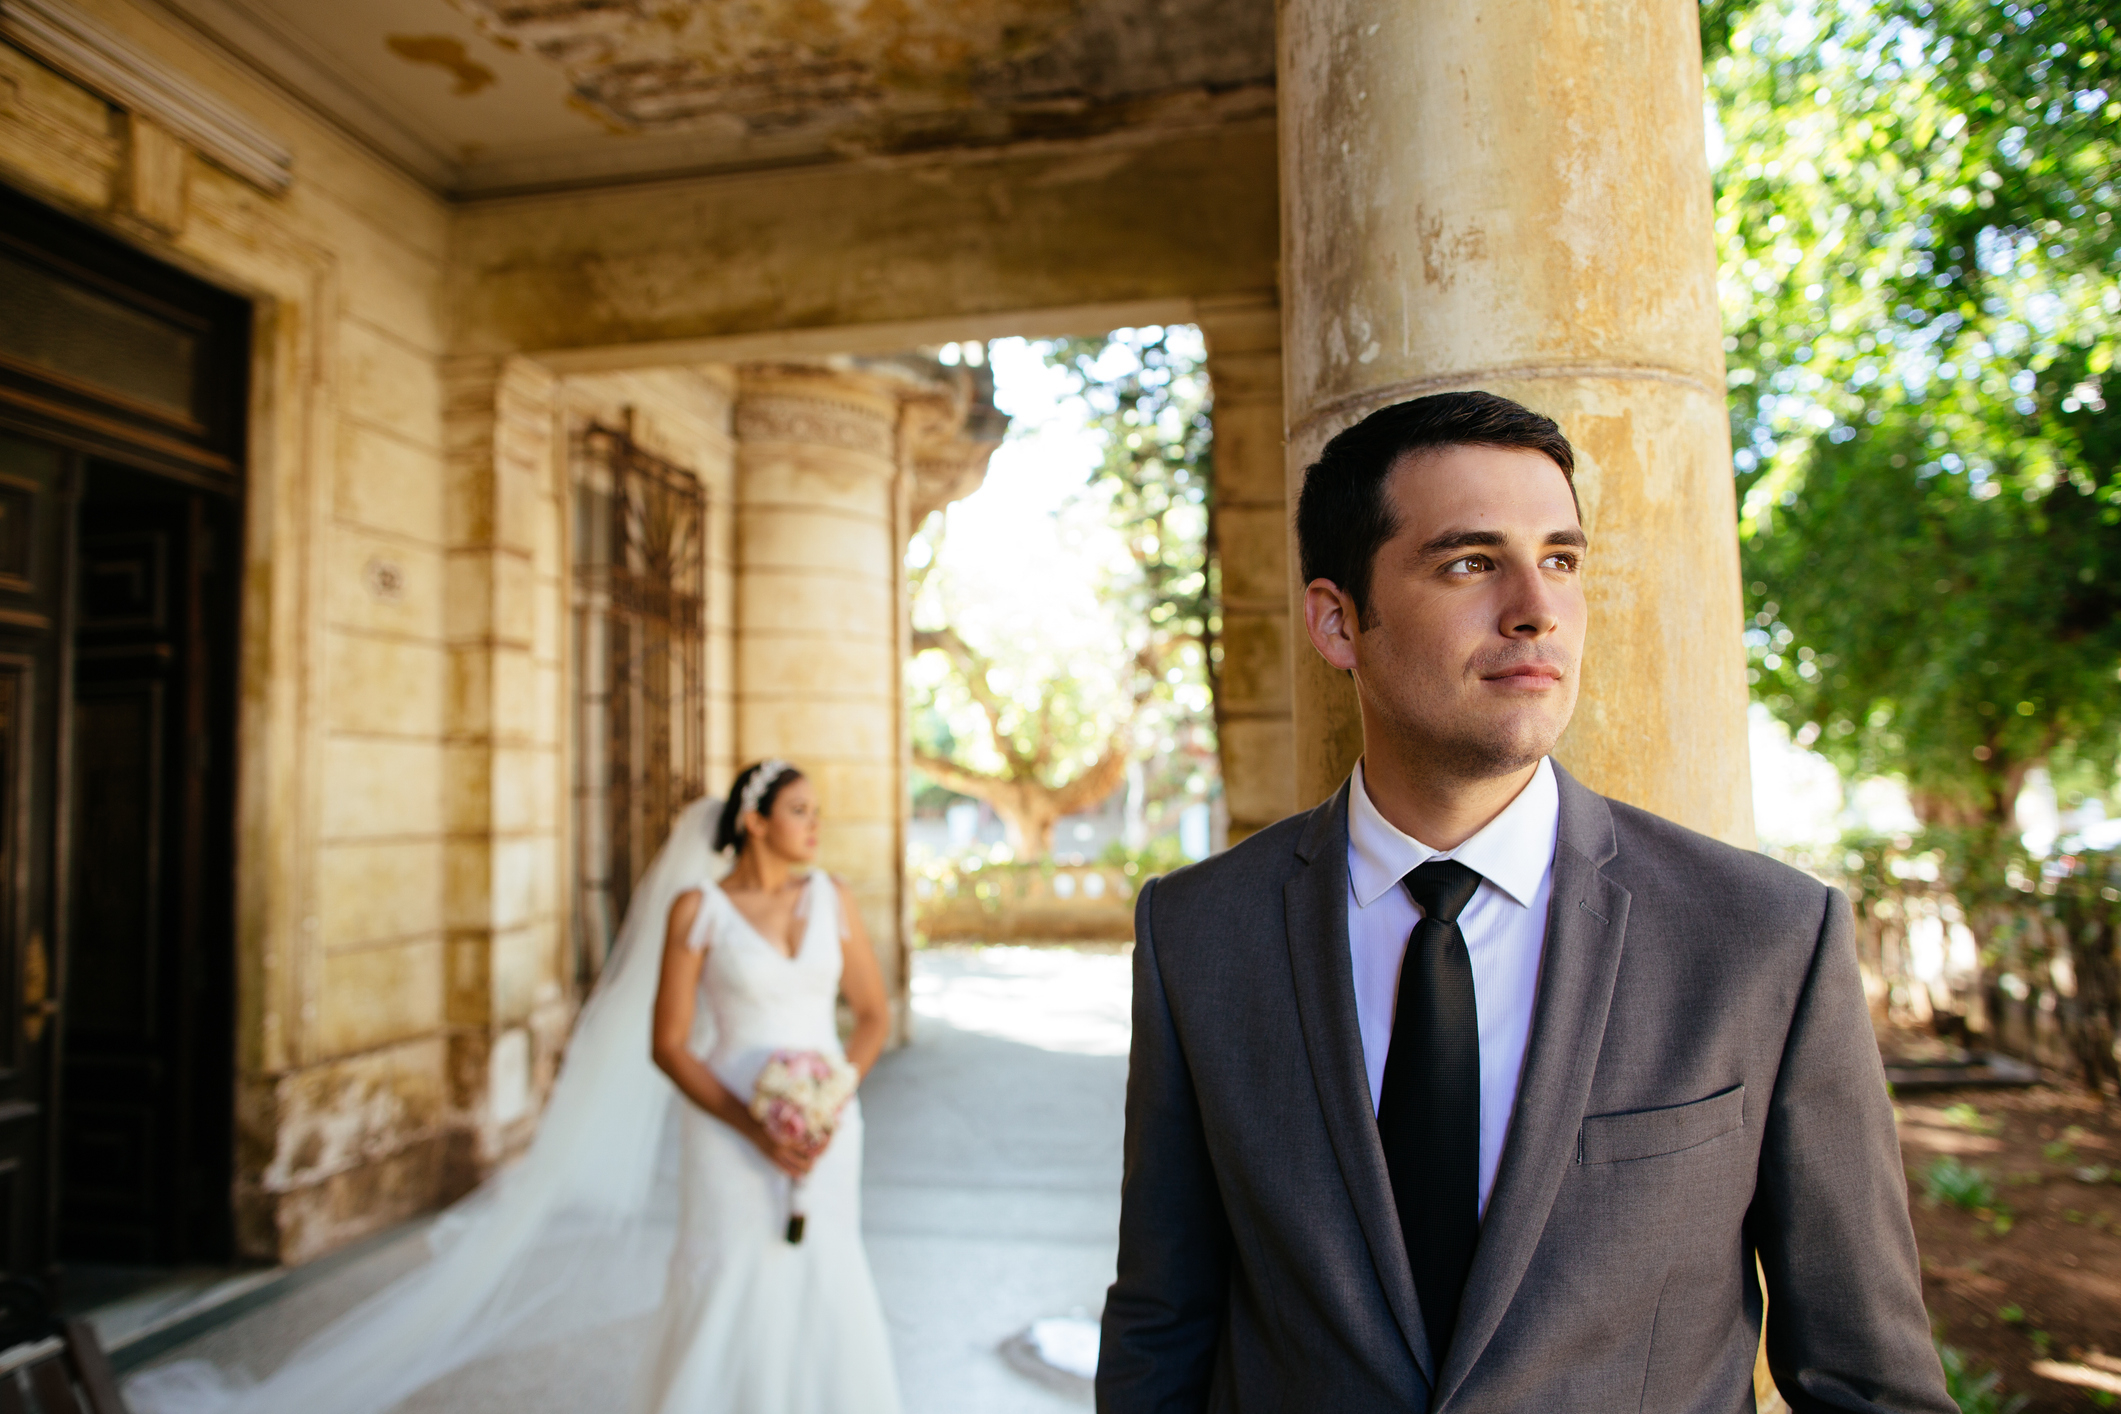 A groom in a suit and tie looks away, standing outside an old building. In the background, a bride in a wedding gown and veil holds a bouquet